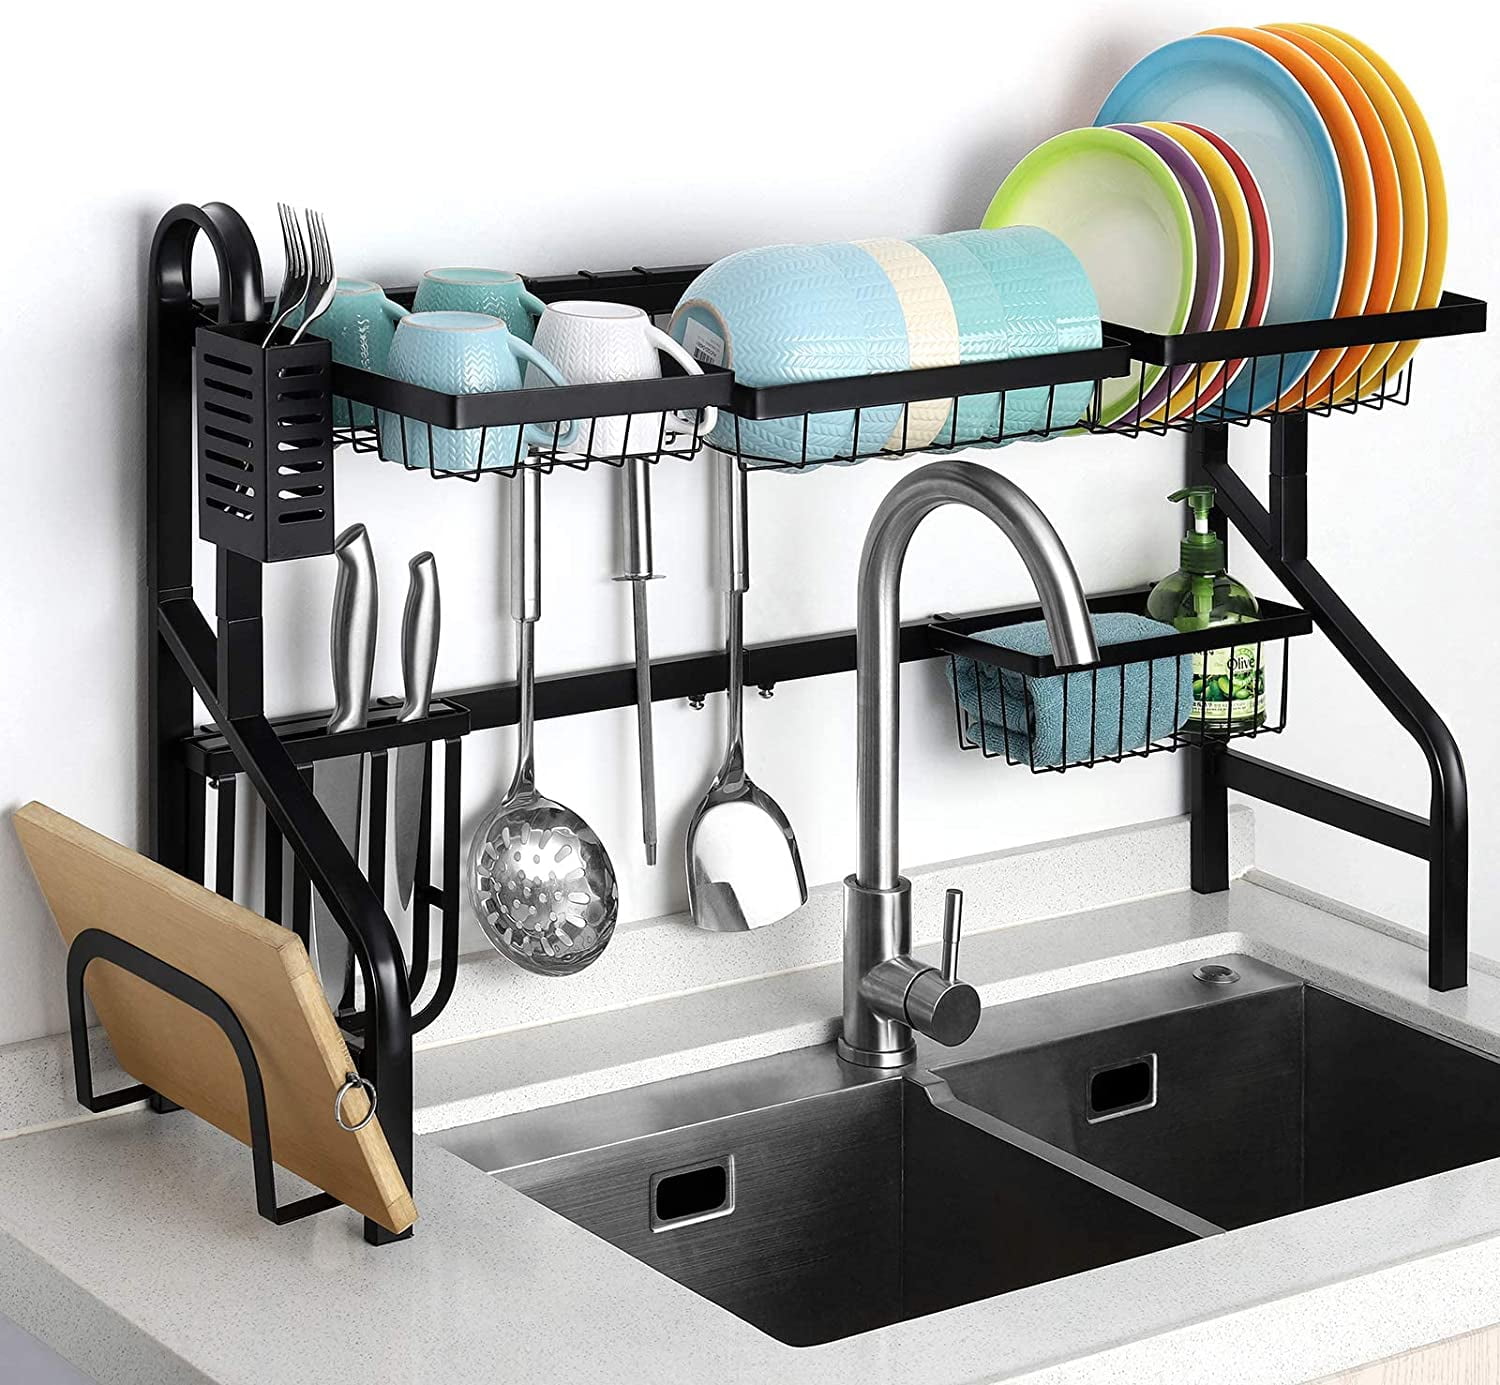  Over The Sink Dish Drying Rack, Adjustable (26.3 to 34.3 inch)  2 Tier Kitchen Counter Dish Drying Rack with Utensil Holder Metal Utility  Hook, Black